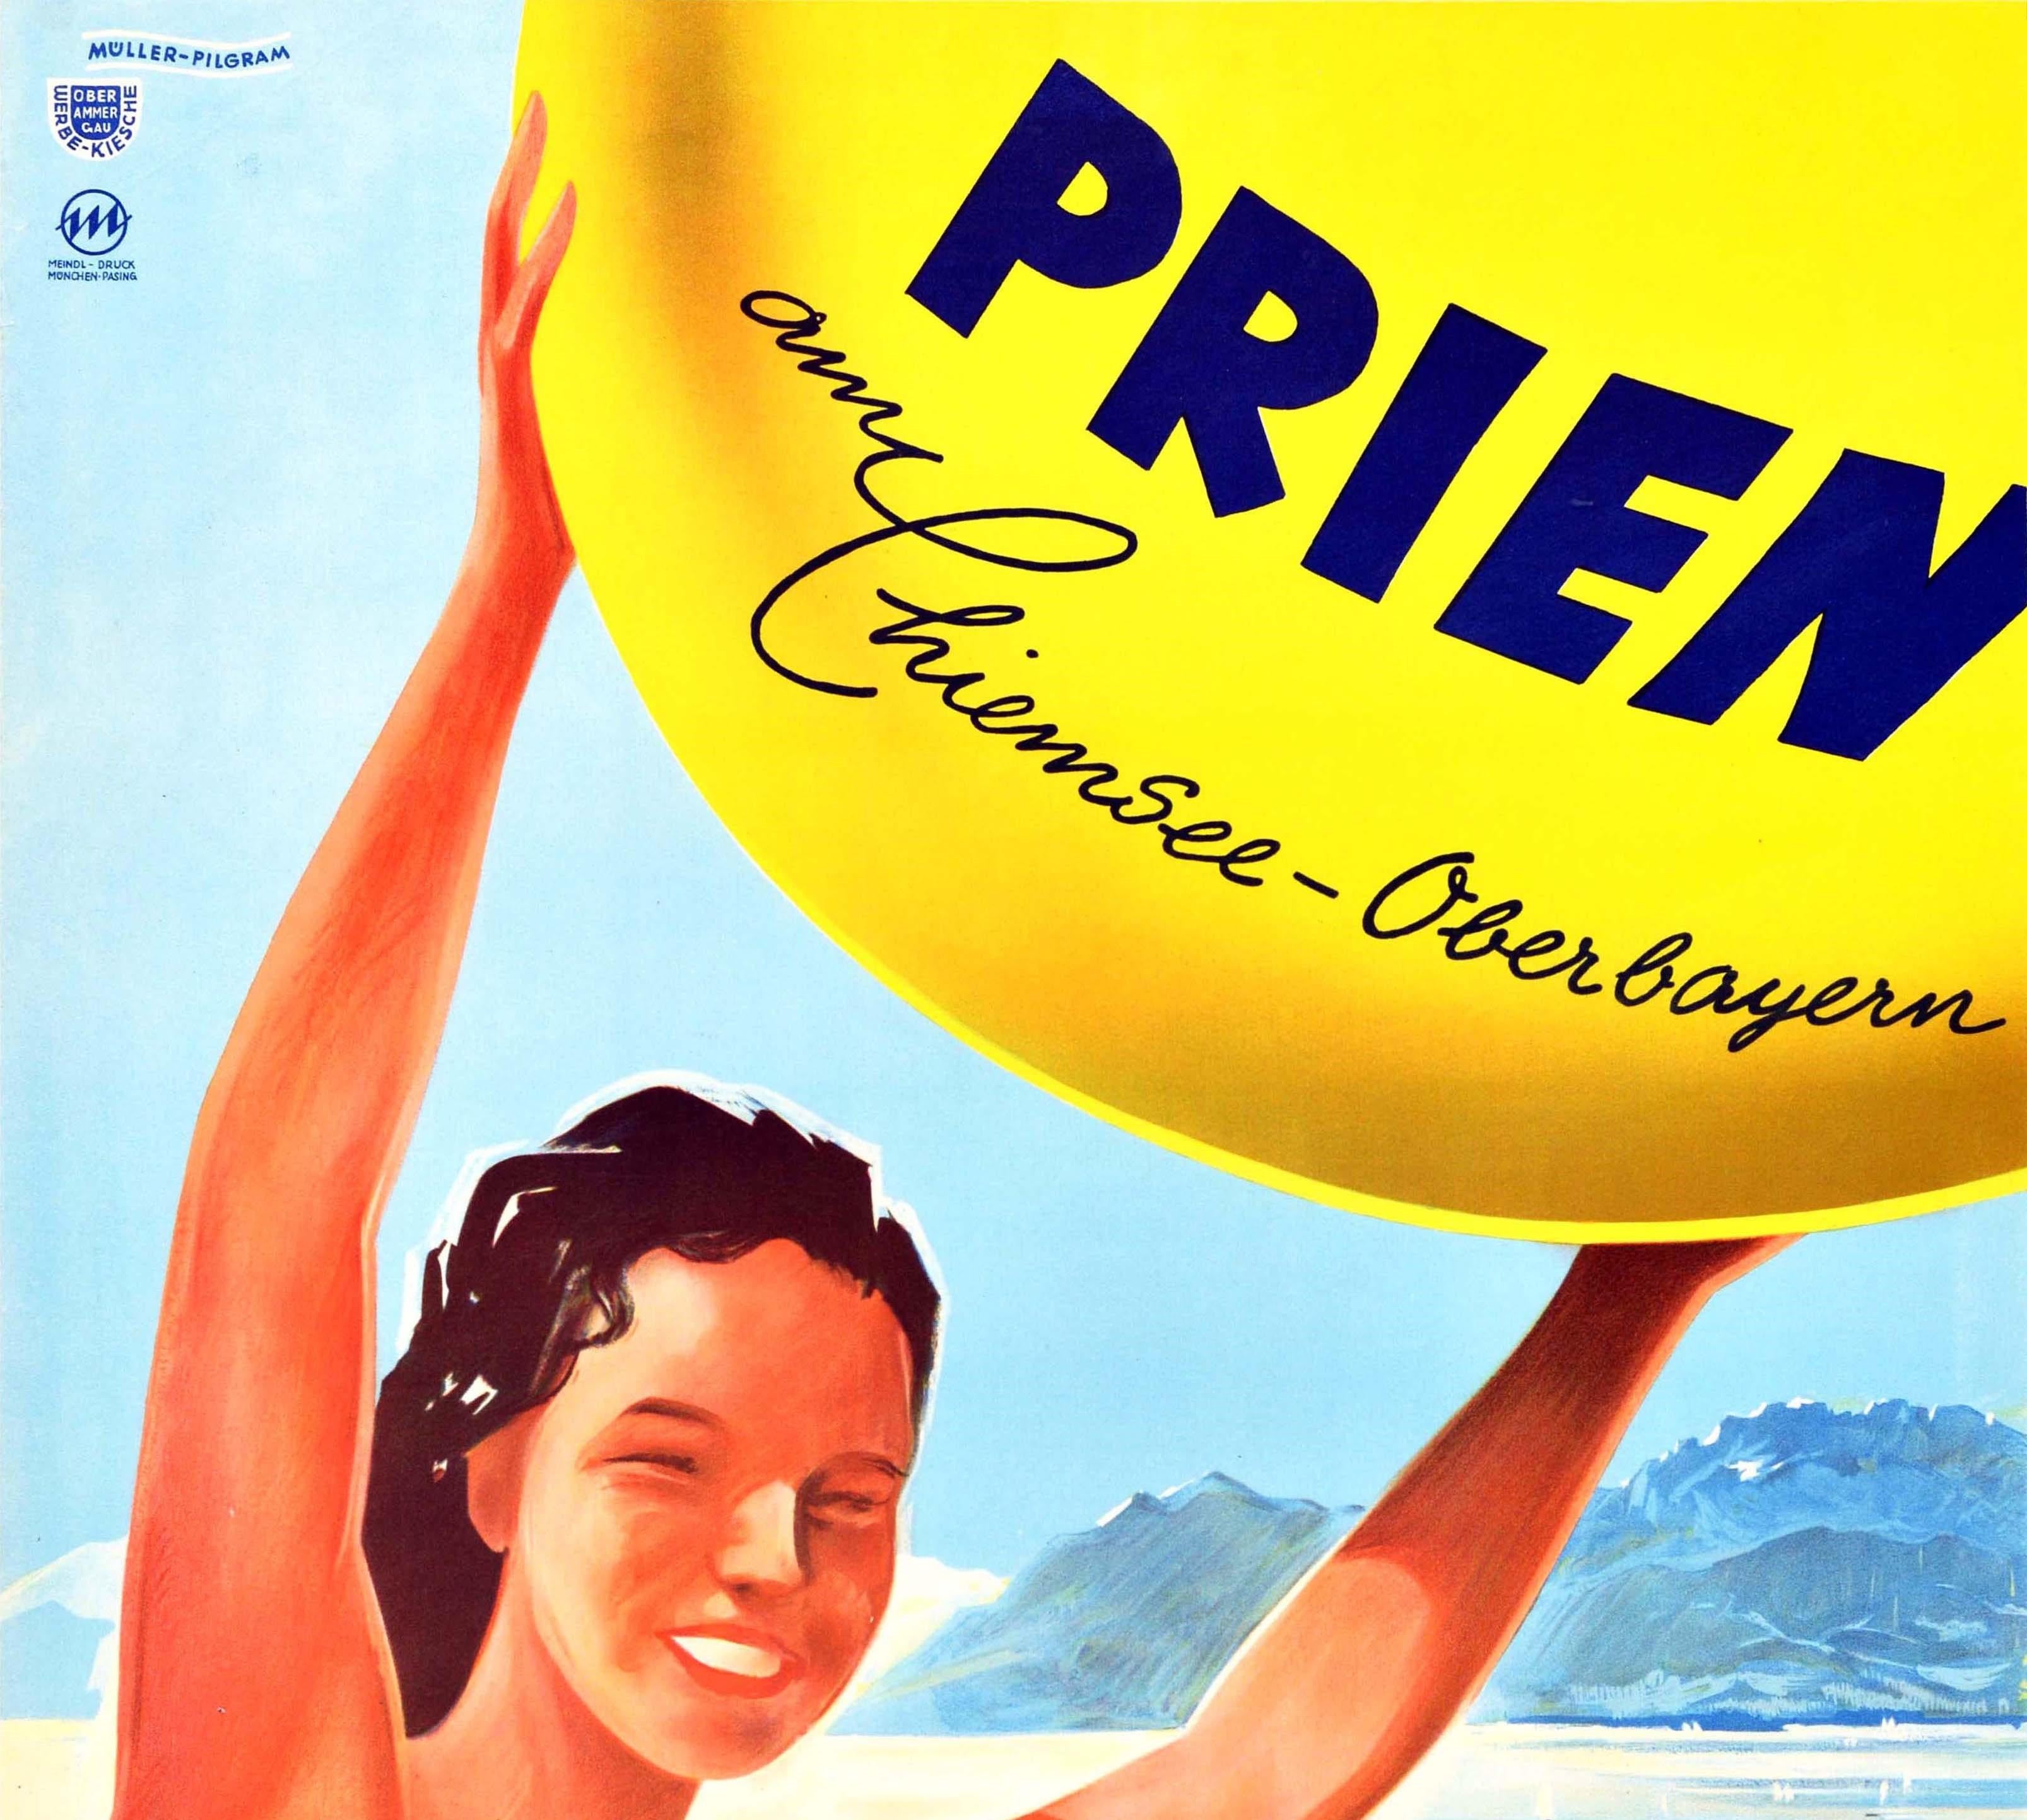 Original vintage travel poster for Prien am Chiemsee Oberbayern Bavaria Germany featuring a smiling lady in a red swimming costume holding a large yellow beach ball above her head with a view over the town showing a church and houses next to a sandy